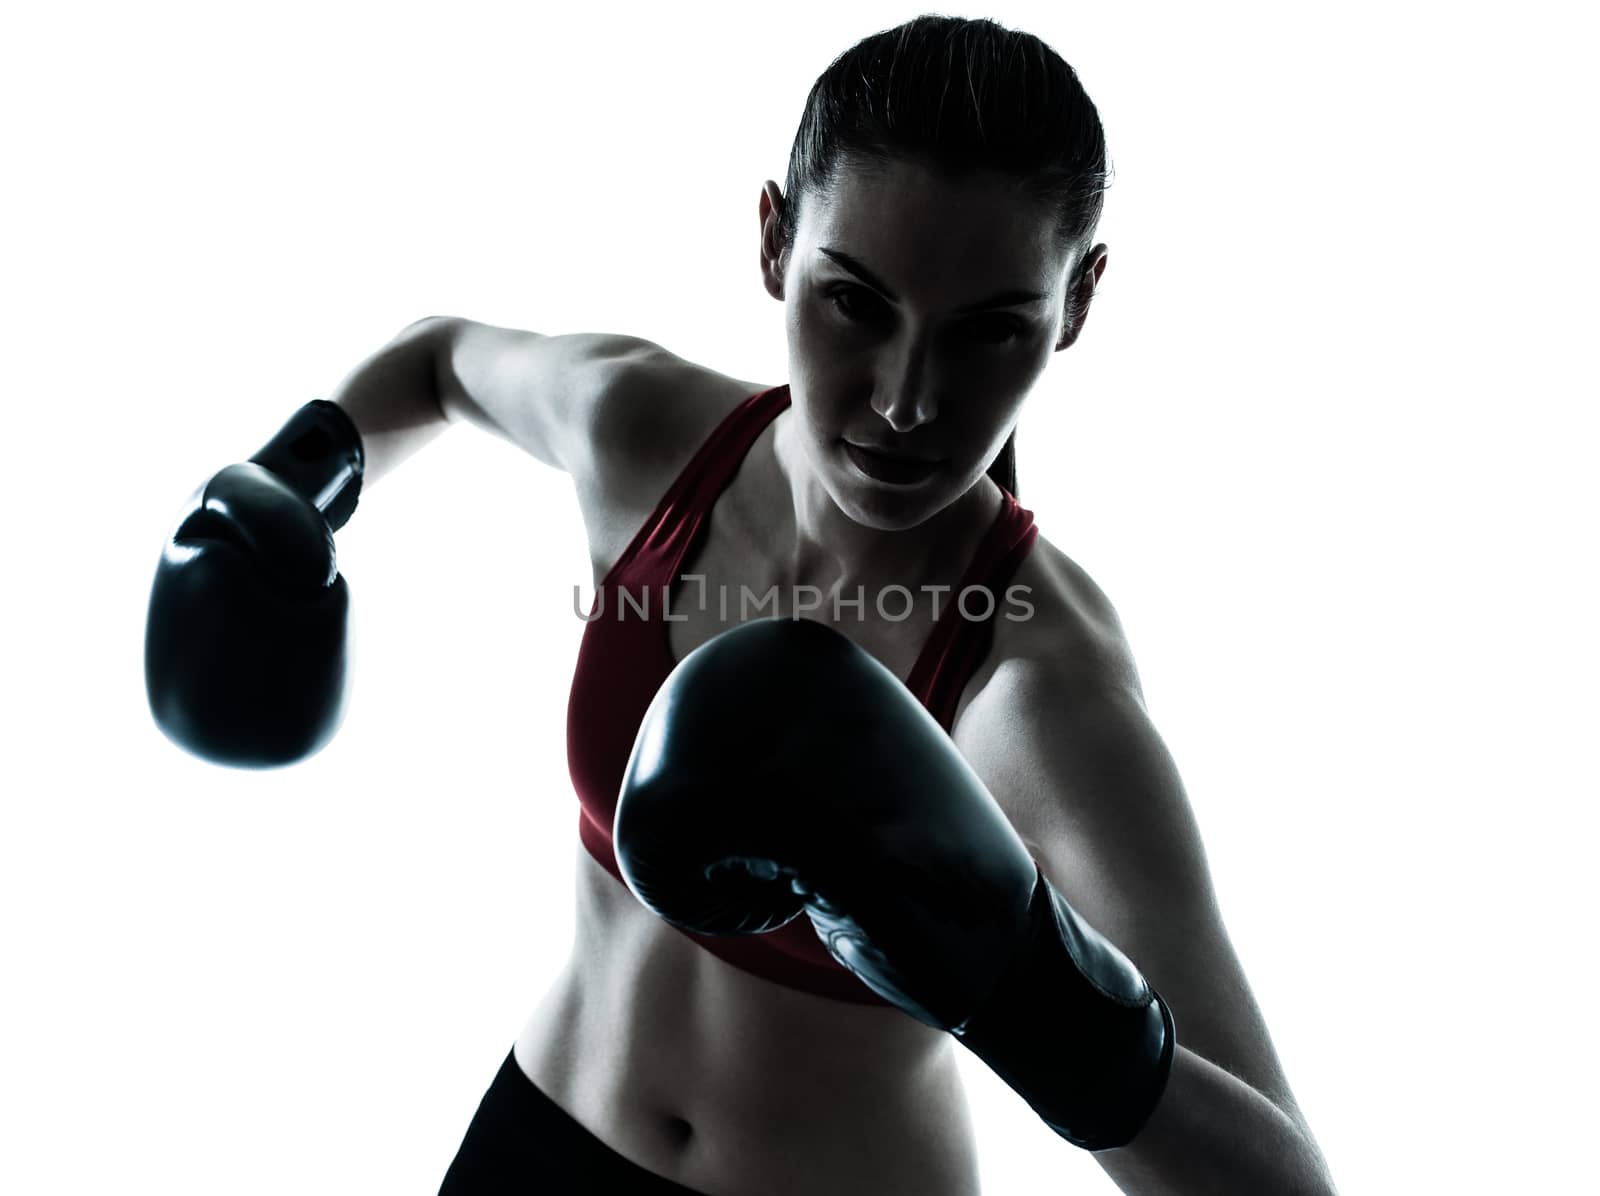 one  woman boxing exercising in silhouette studio isolated on white background